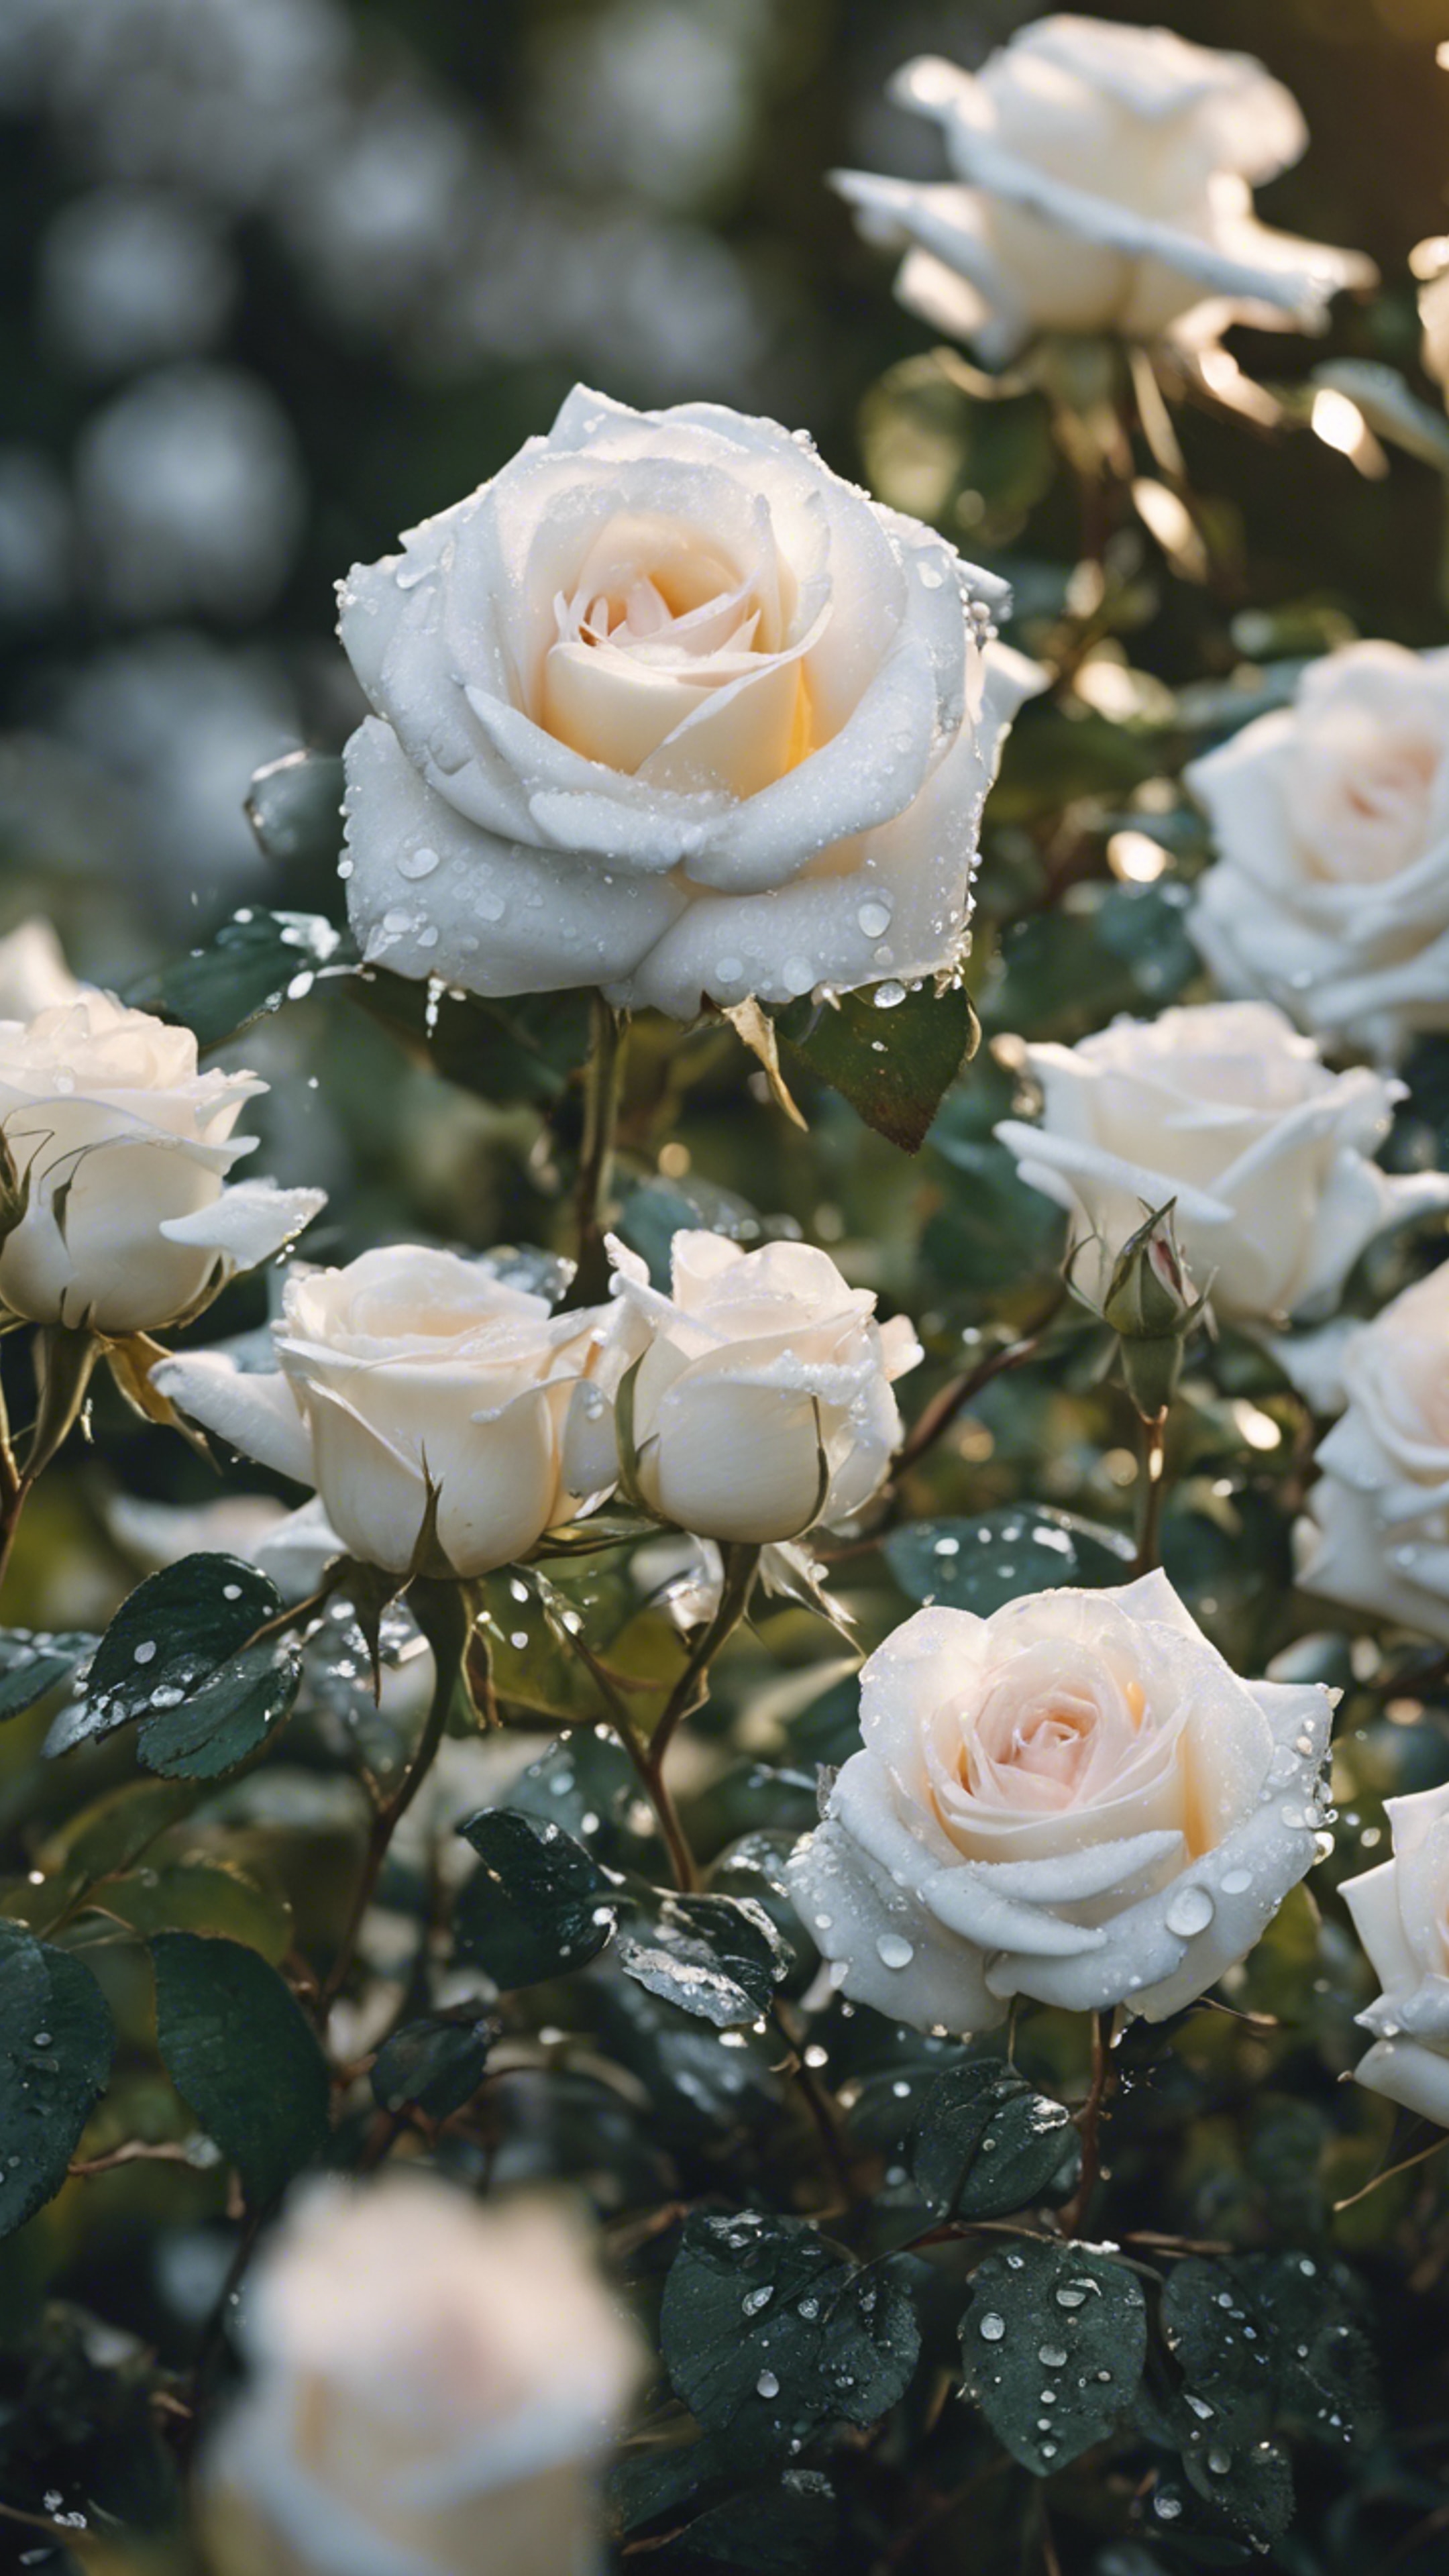 White roses covered in silver morning dew in a lush rose garden. Шпалери[67c2c5bc62874412a2b6]